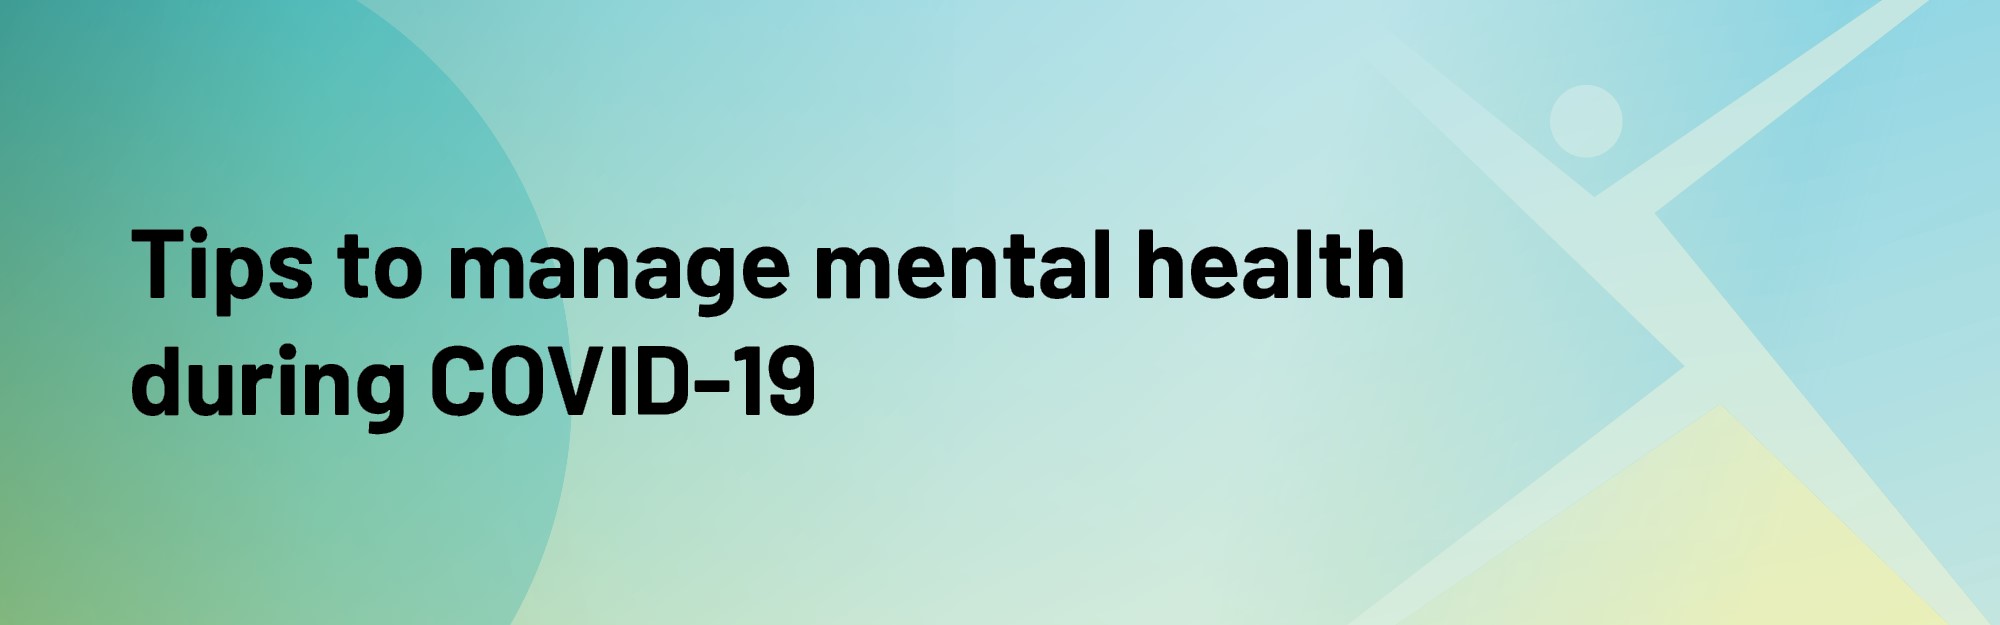 Tips to manage mental health during COVID-19